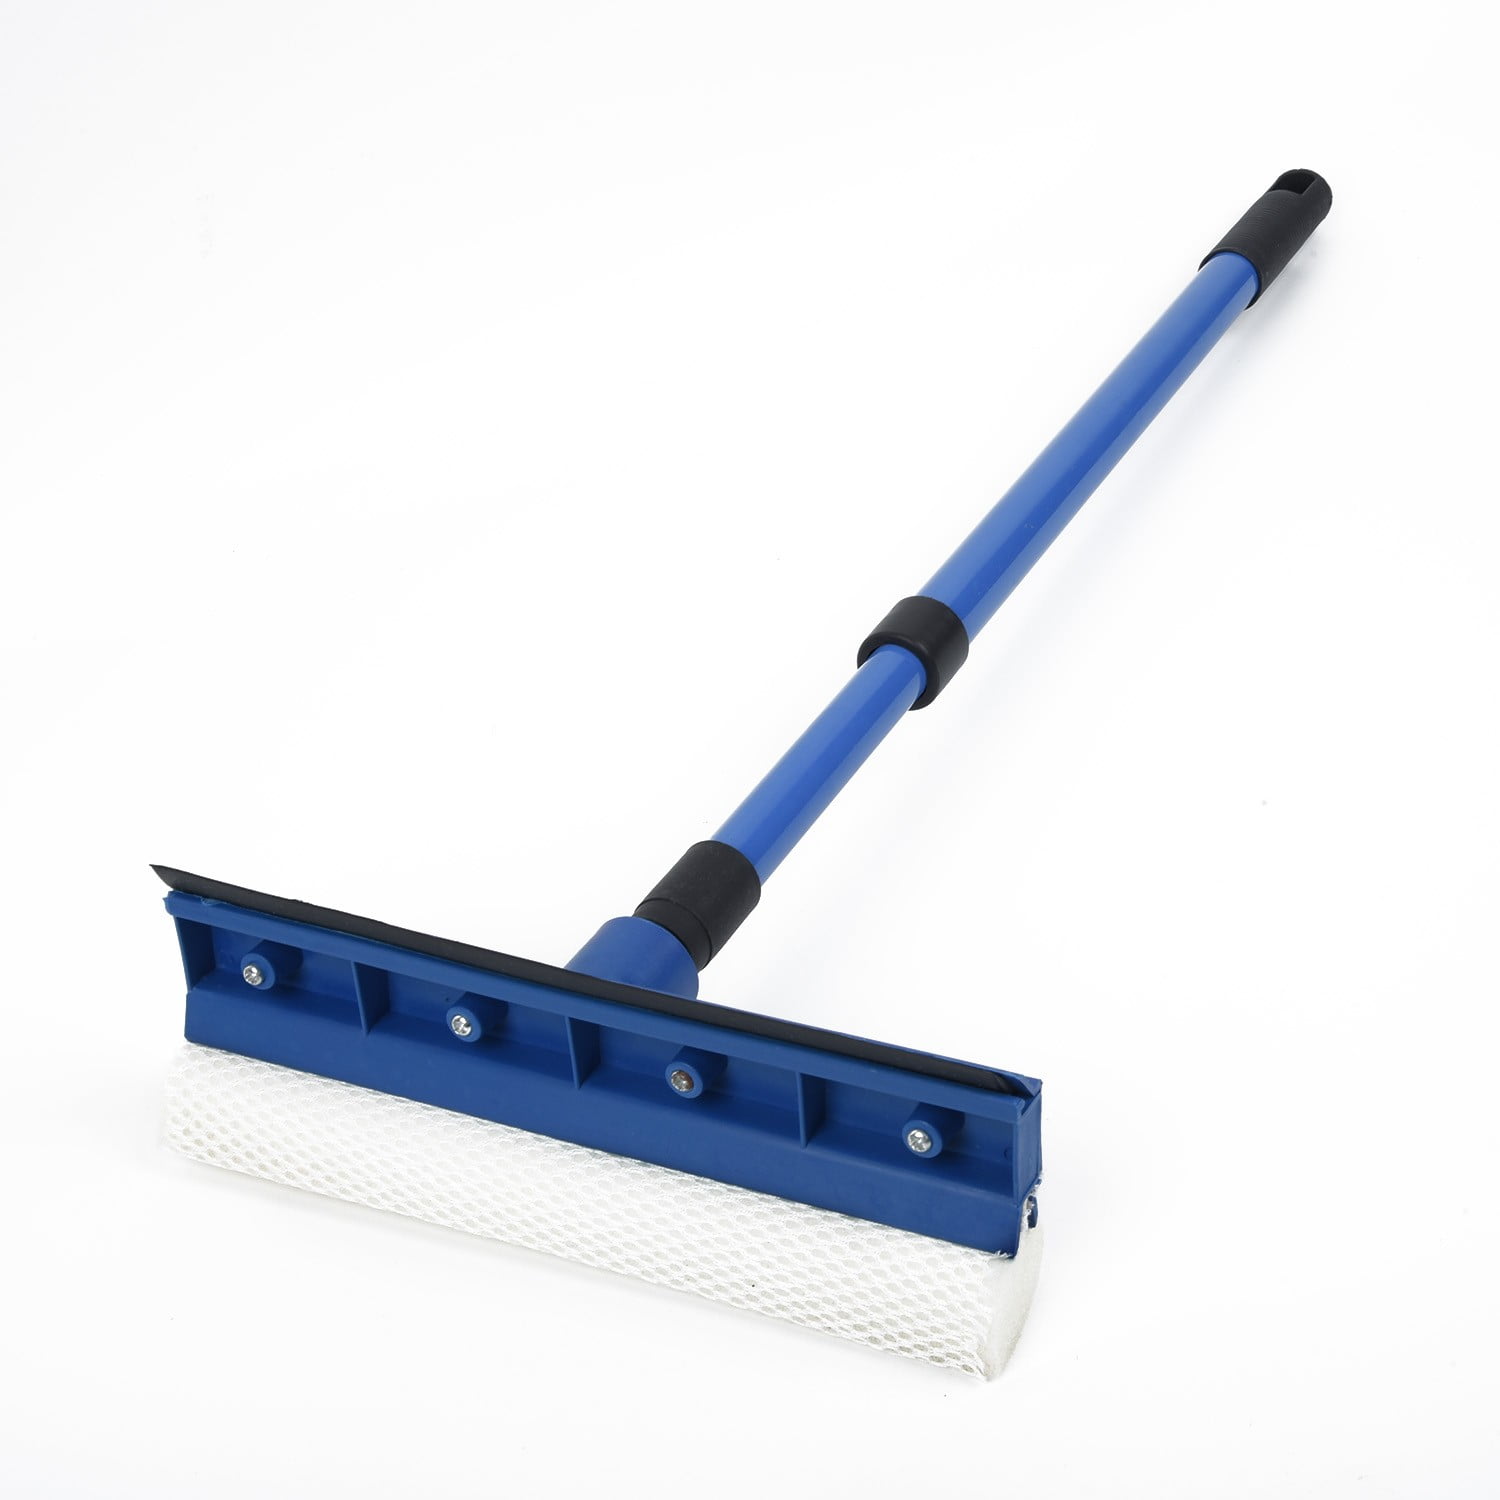  Professional Squeegee Window 180° Rotating Cleaning Equipment  and Rotating Floor Brush Scrubber, Wiper Window Cleaner Floor Squeegee, 77  Inch Extra Long for High Glass, Toilet and Car Window : Health & Household